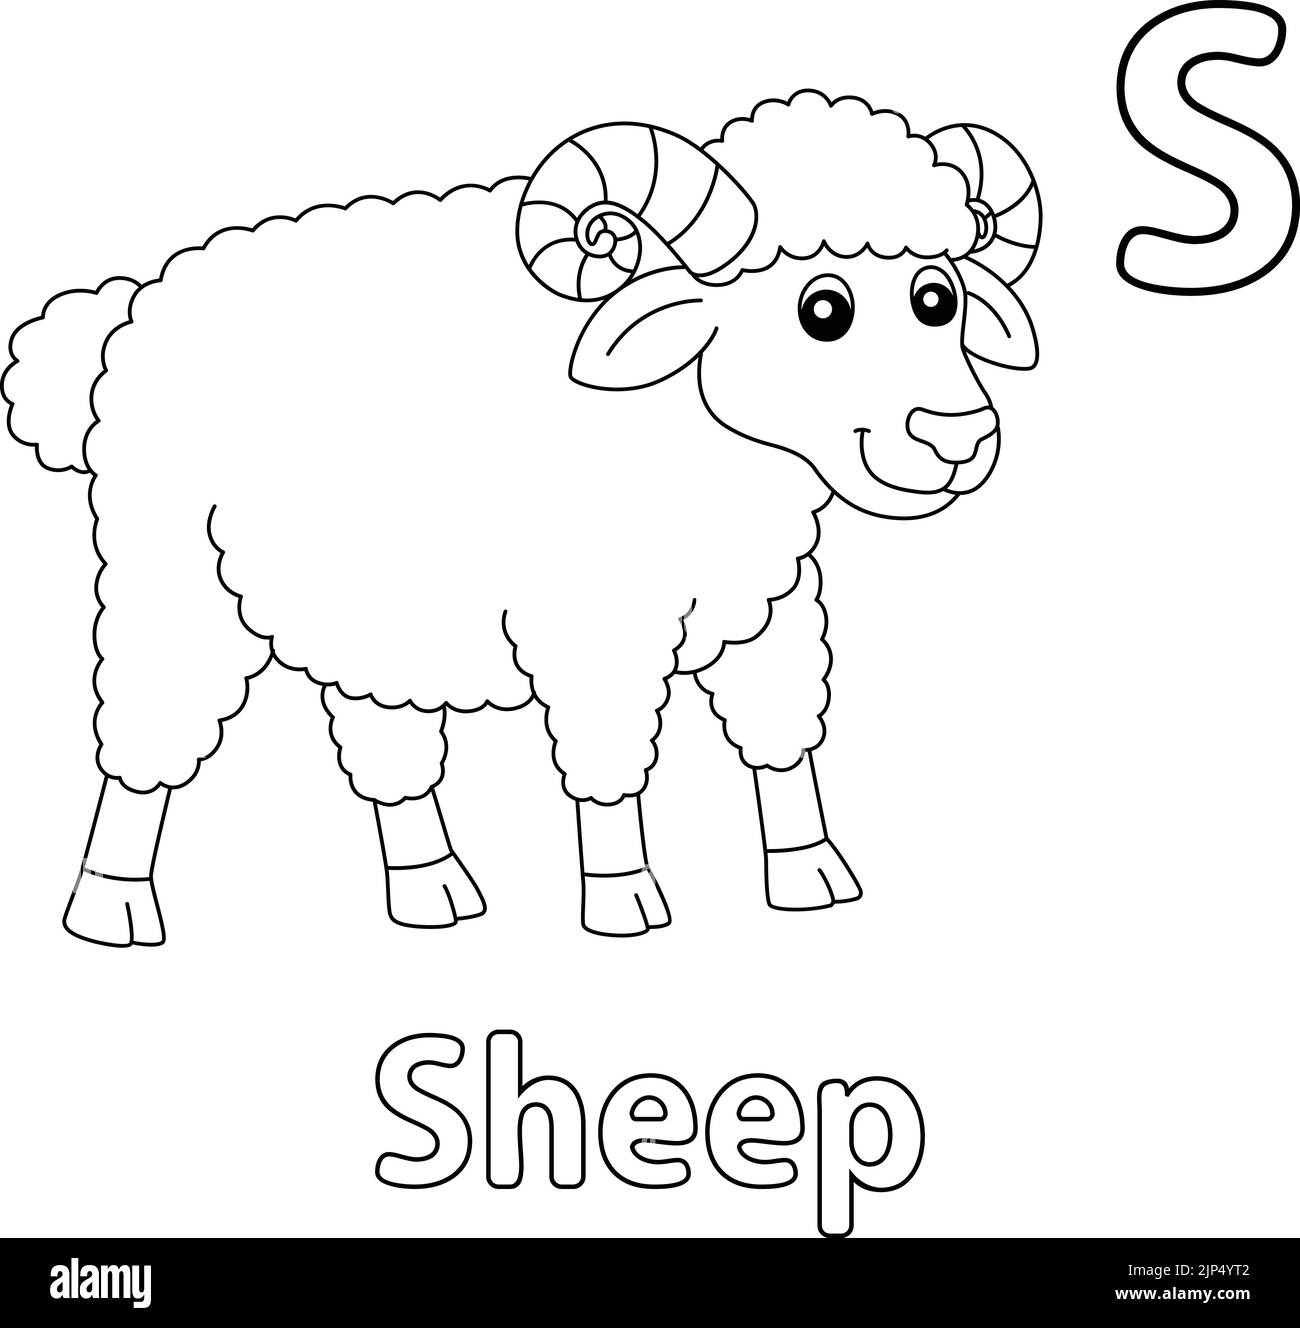 Sheep Alphabet ABC Coloring Page S Stock Vector